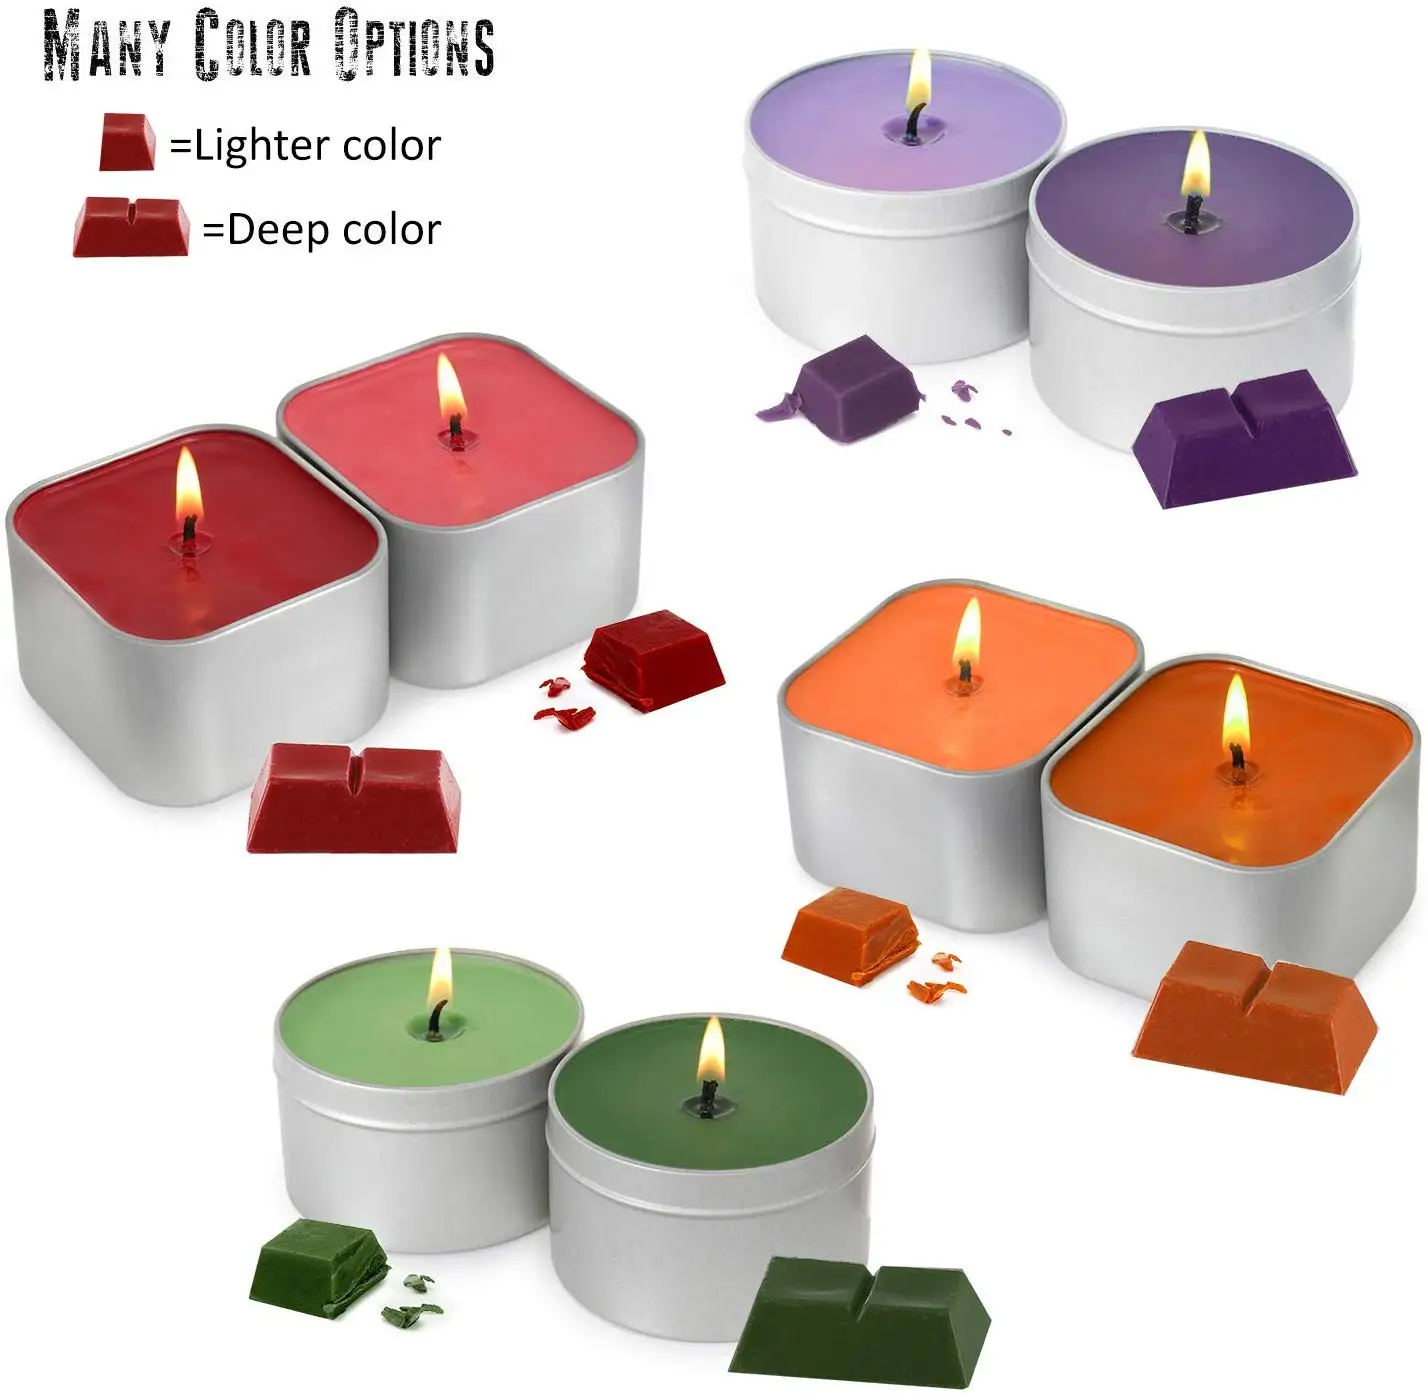 China Candle Supplier - Shijiazhuang Tabo Candles Sales Co., Ltd.